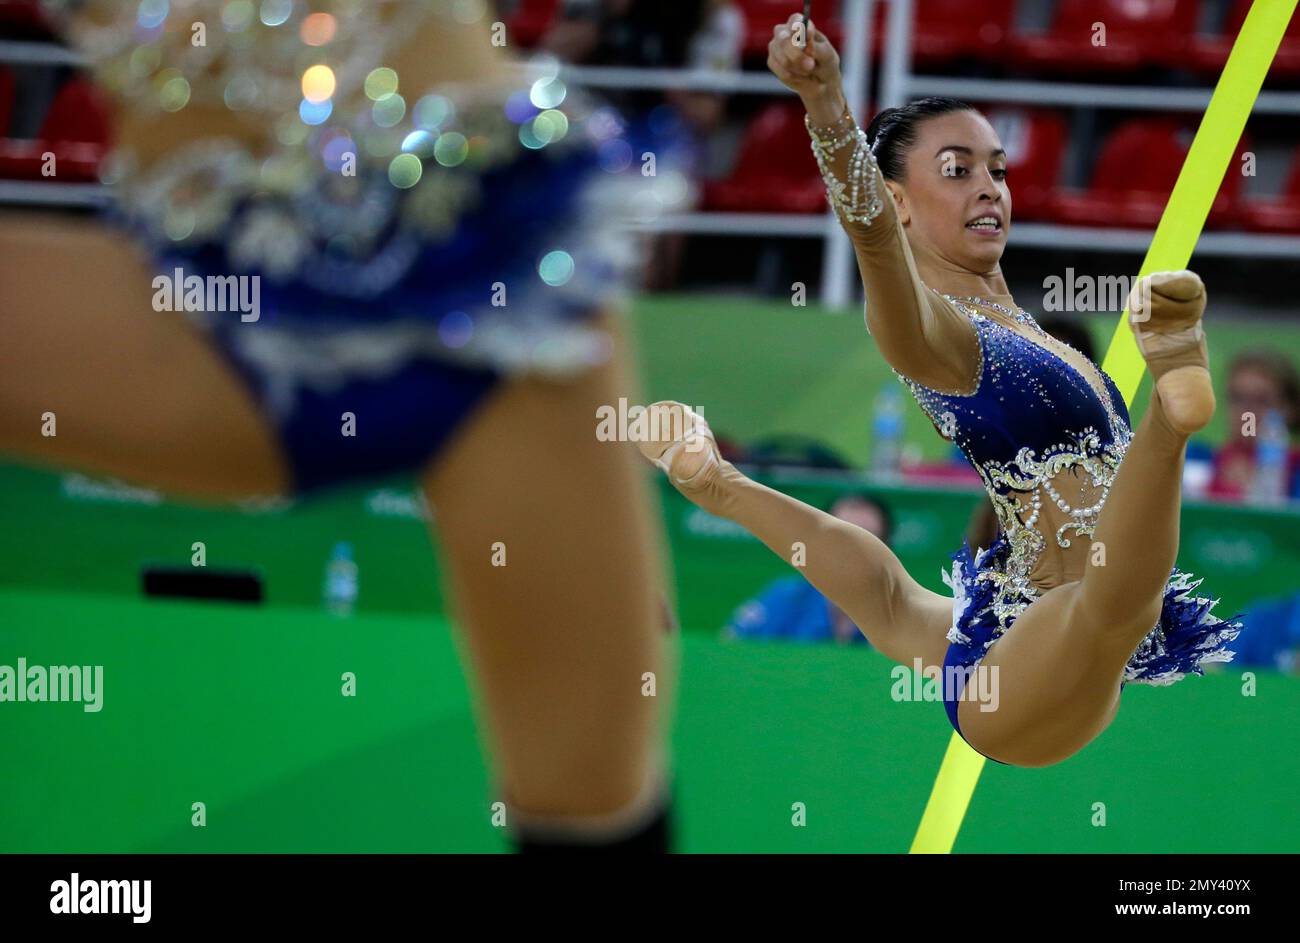 Team Italy performs during a rhythmic gymnastics practice session at the 2016 Summer Olympics in Rio de Janeiro, Brazil, Thursday, Aug